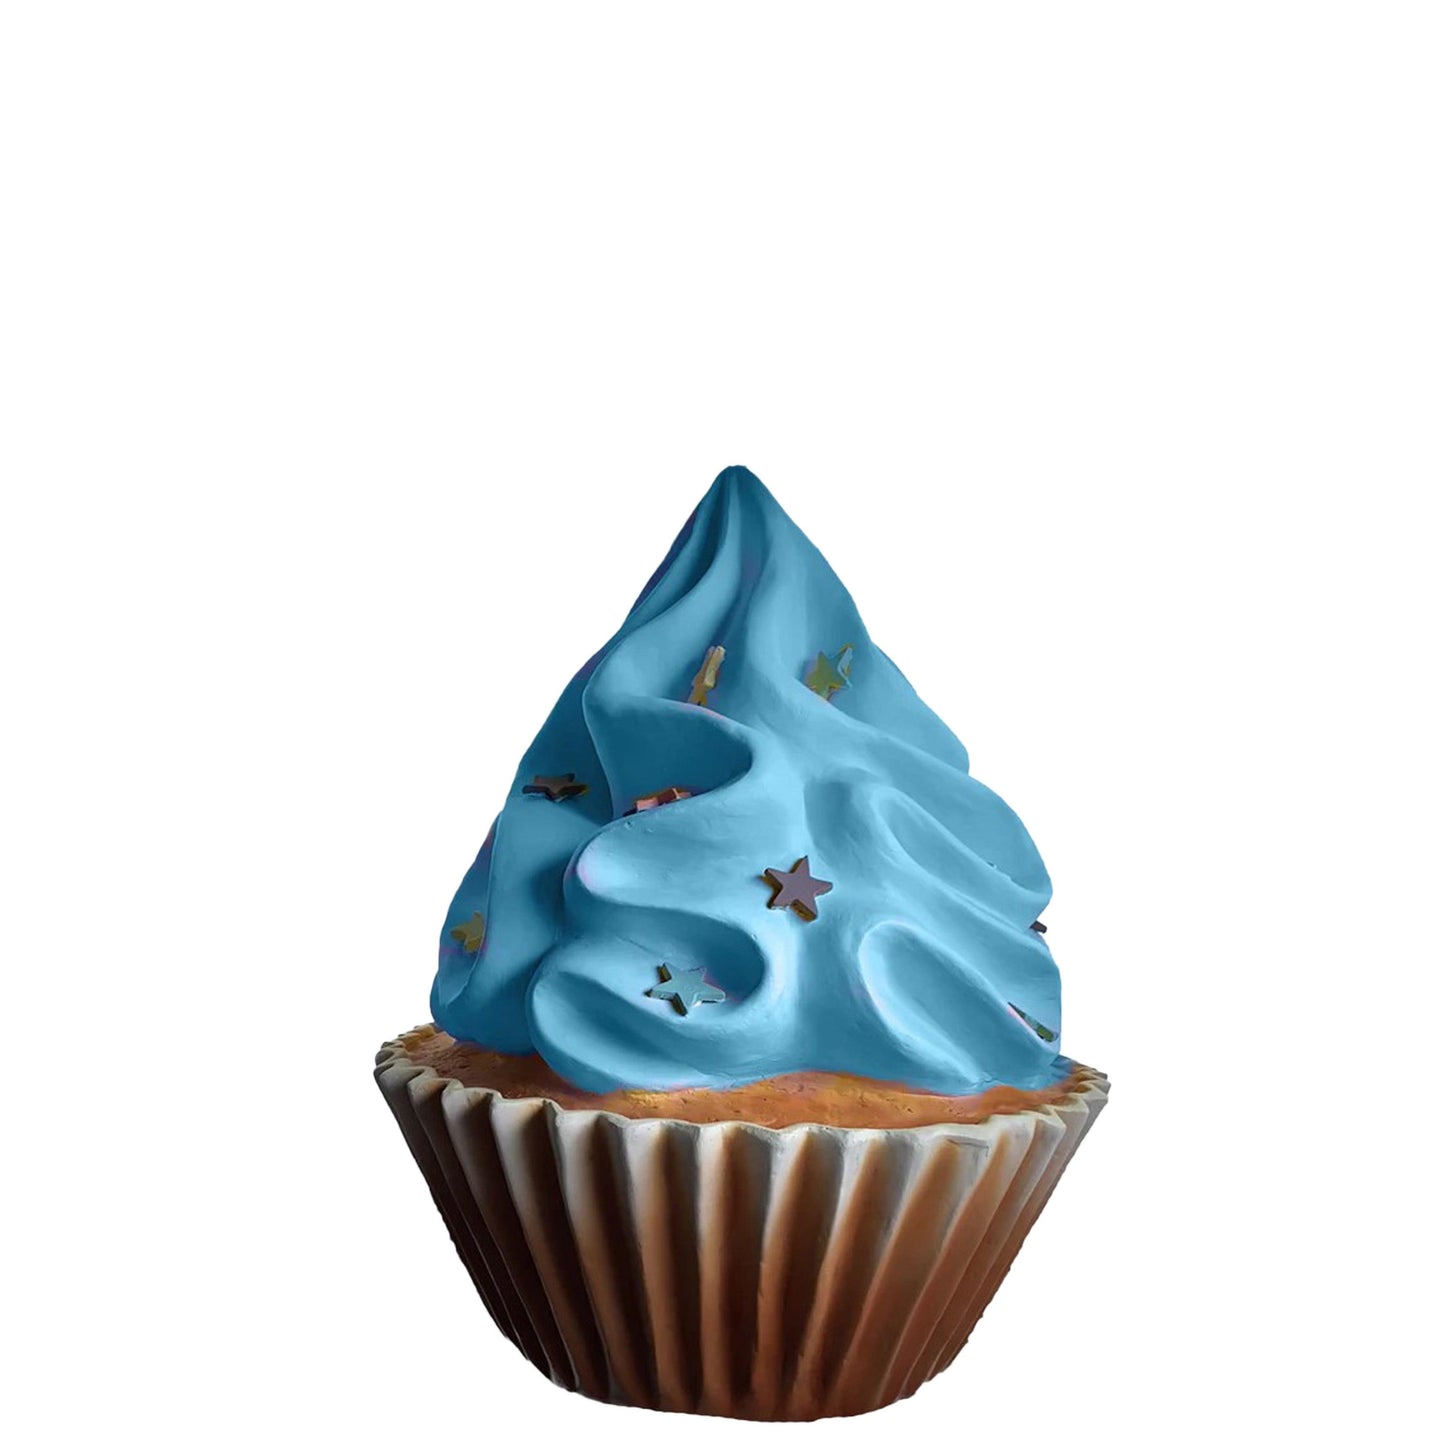 Blue Cupcake Statue With Stars